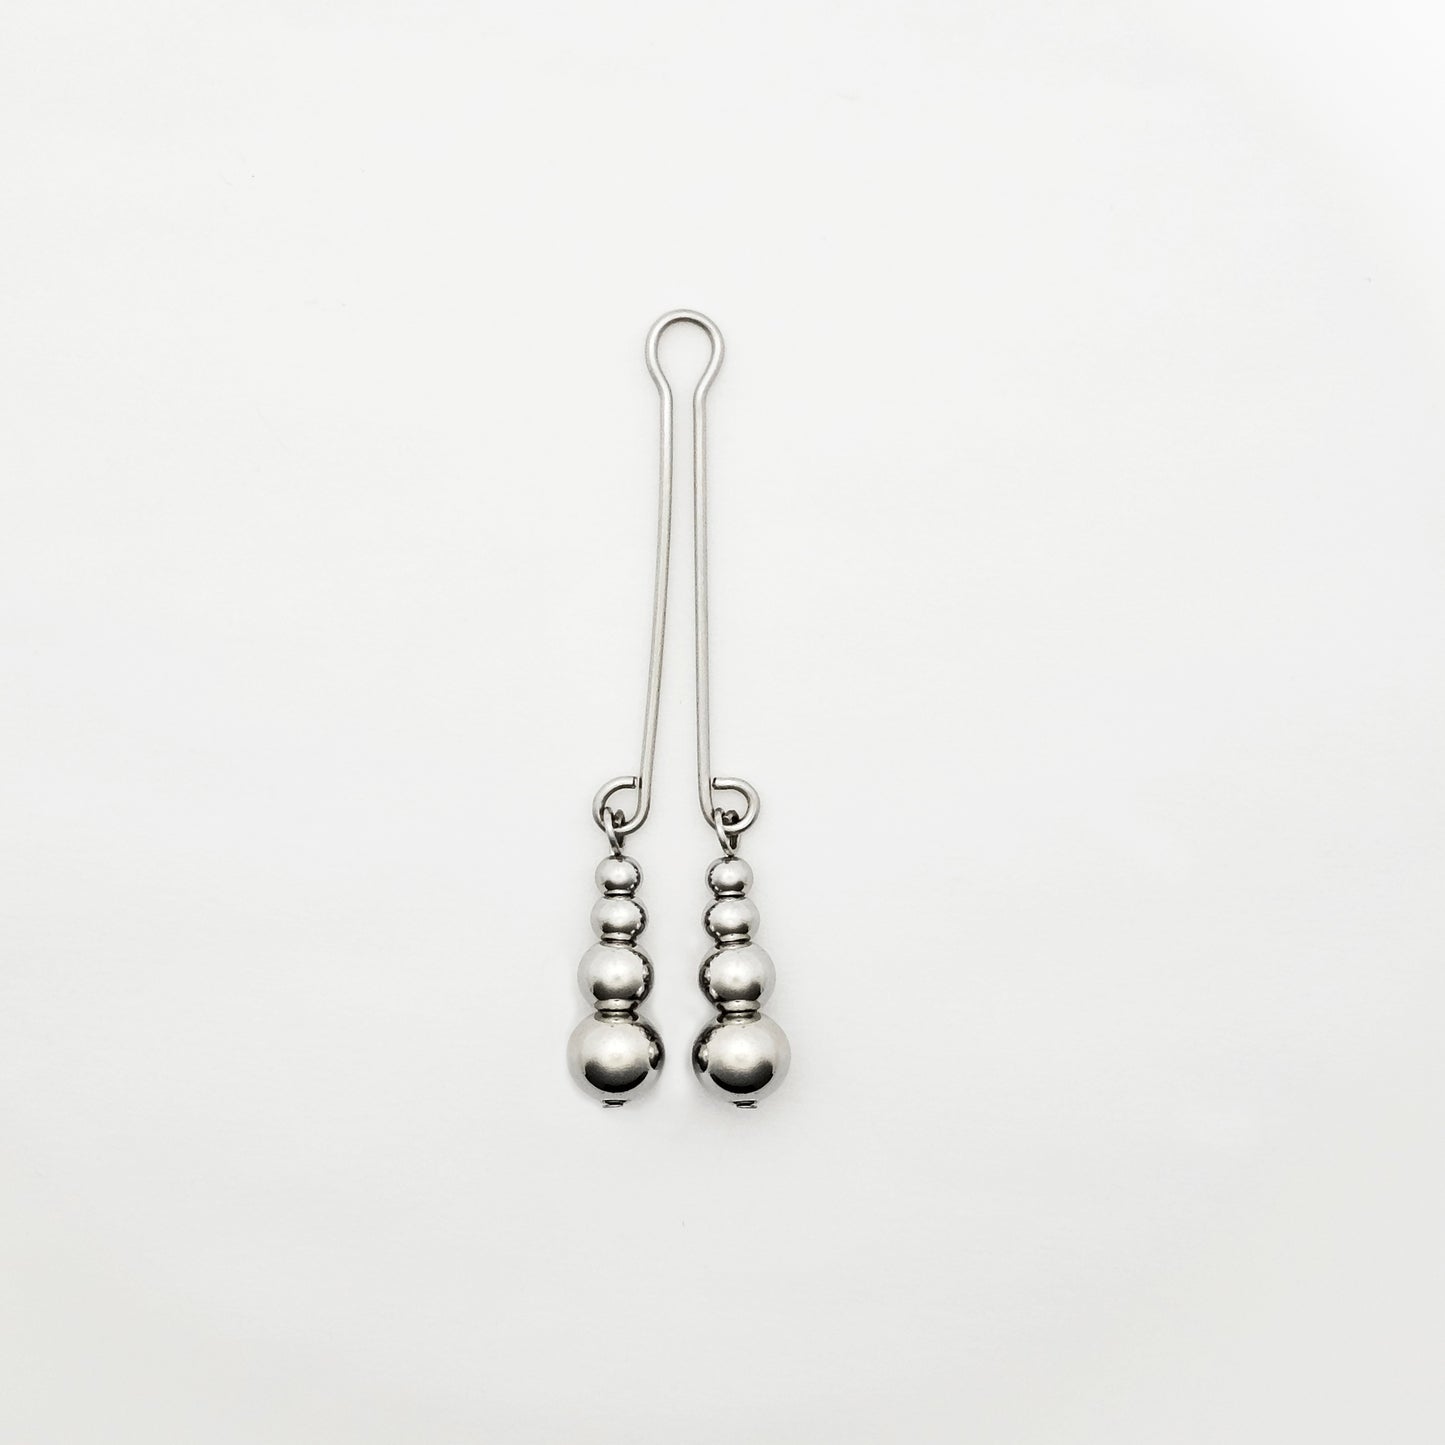 Stainless Steel Clit Clamp / Labia Clip with Weighted Beads